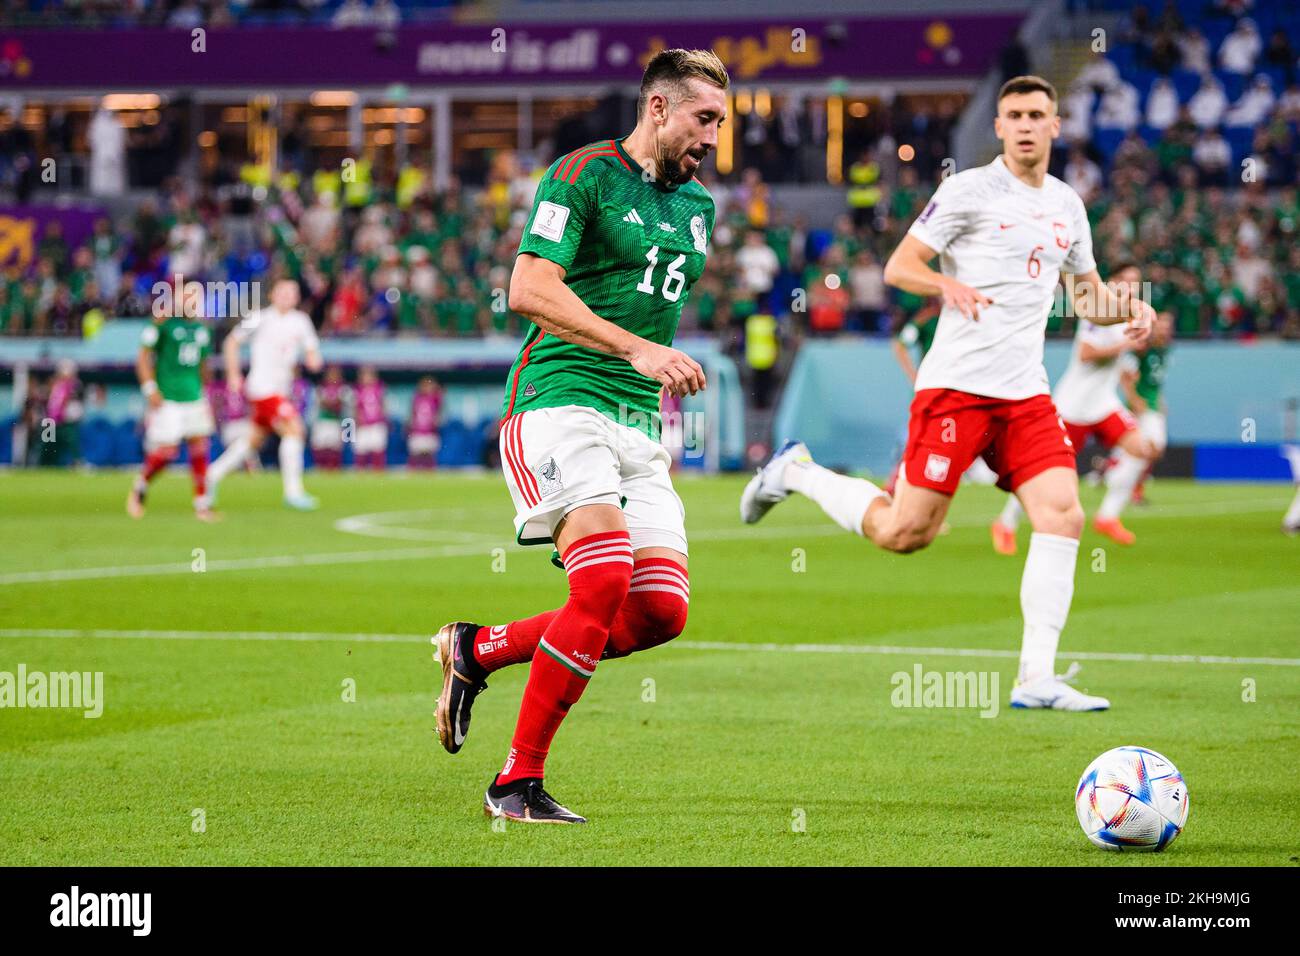 Doha, Qatar. 22nd Nov, 2022. Estadio 974 Hector Herrera of Mexico during a match between Mexico and Poland, valid for the group stage of the World Cup, held at Estadio 974 in Doha, Qatar. (Marcio Machado/SPP) Credit: SPP Sport Press Photo. /Alamy Live News Stock Photo